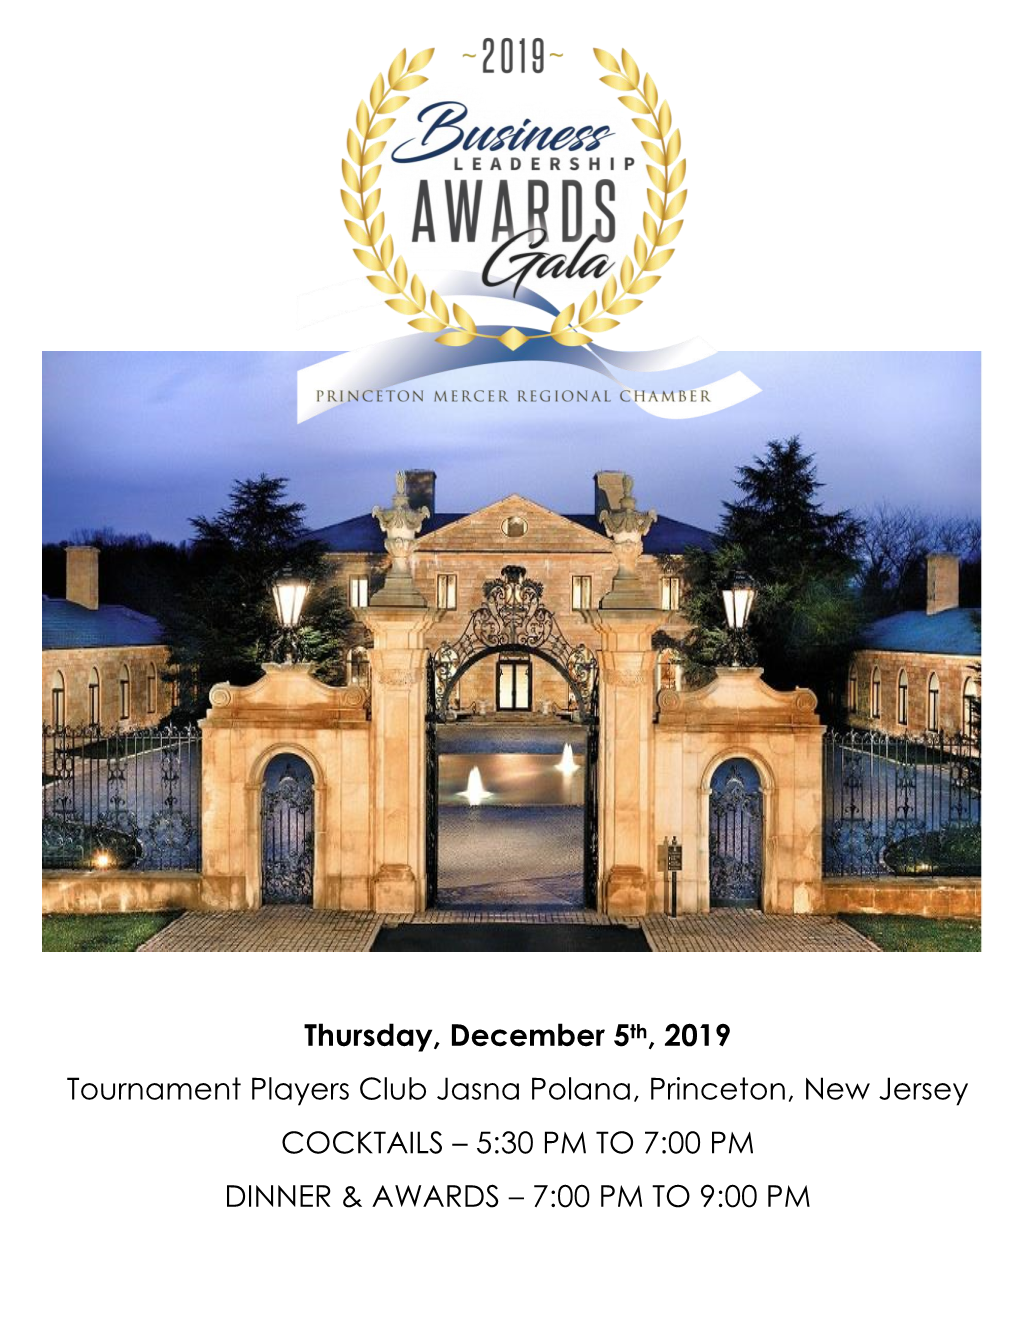 Thursday, December 5Th, 2019 Tournament Players Club Jasna Polana, Princeton, New Jersey COCKTAILS – 5:30 PM to 7:00 PM DINNER & AWARDS – 7:00 PM to 9:00 PM